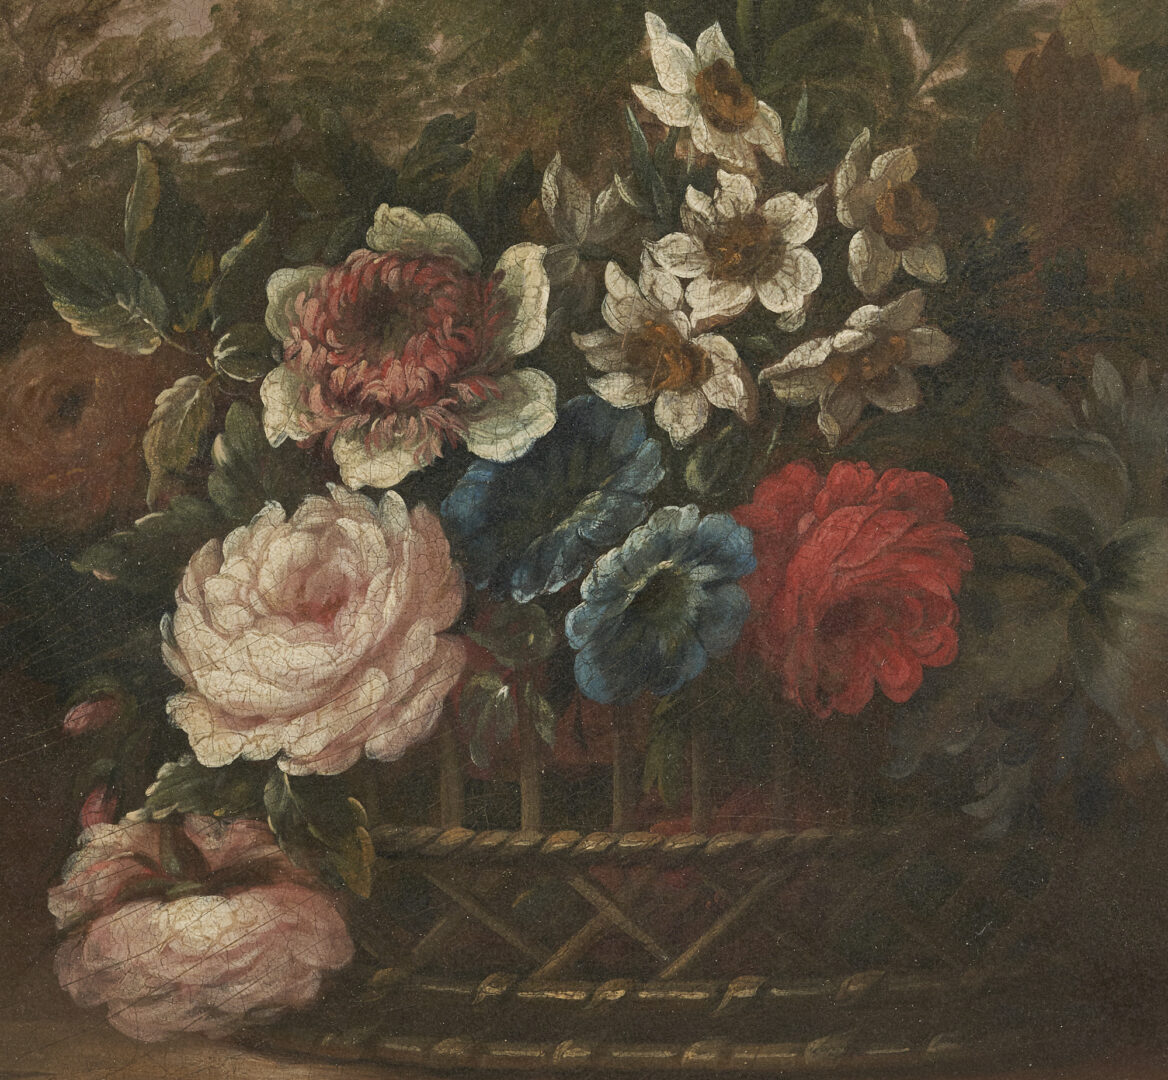 Lot 656: 19th C. English School Painting, Basket of Flowers